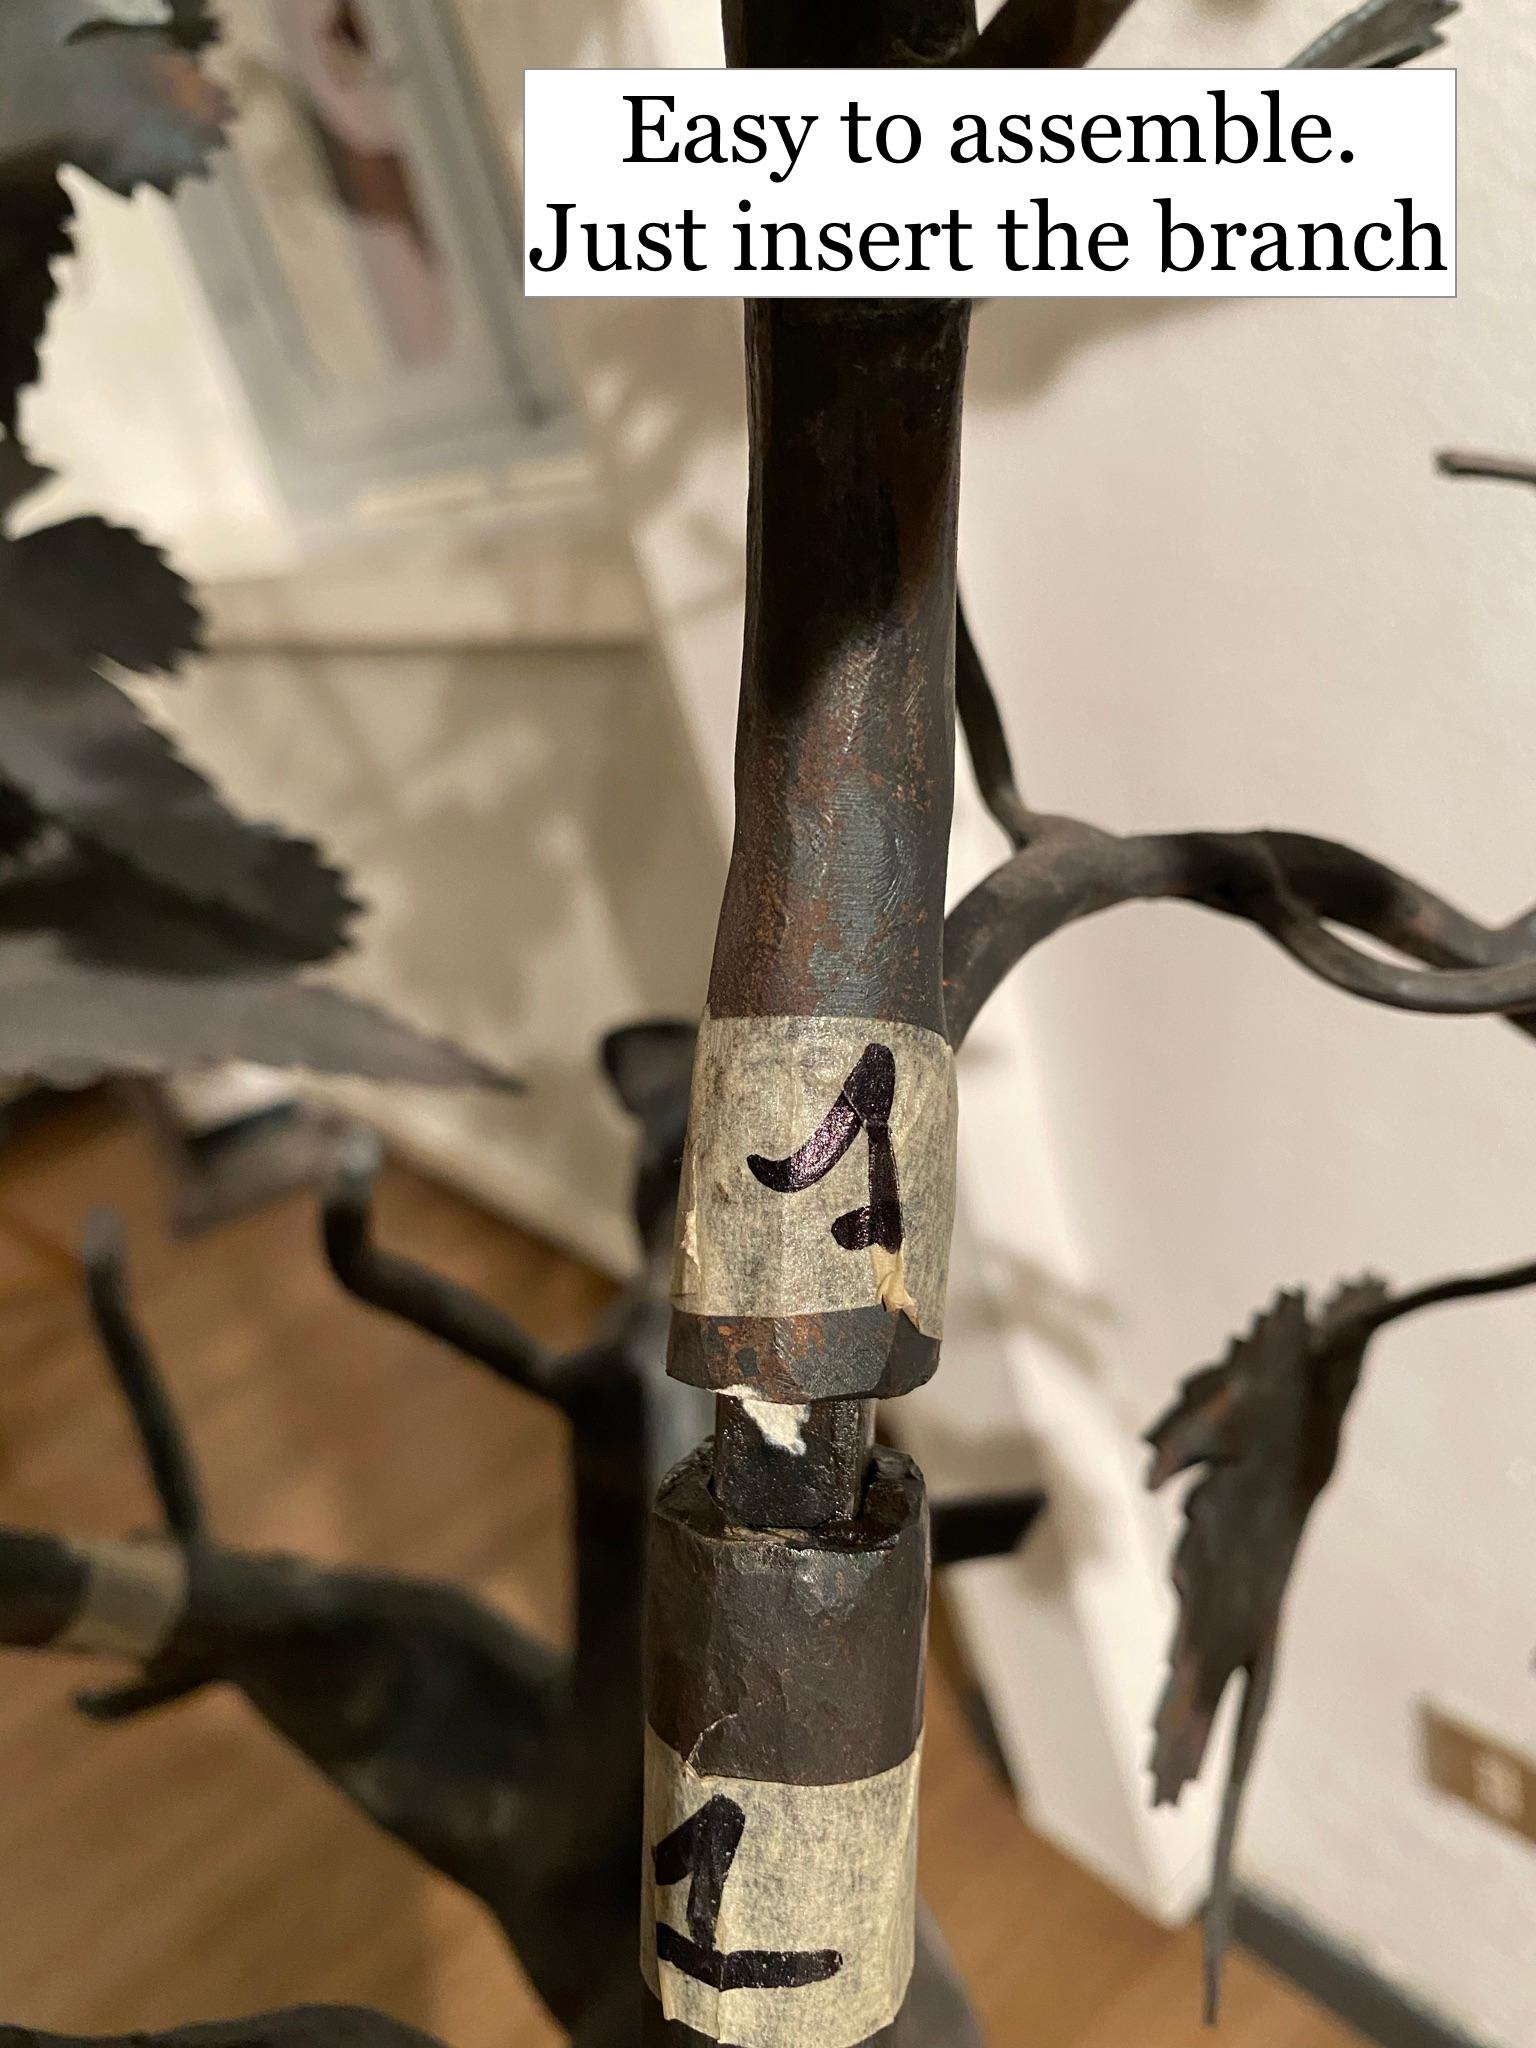 The wrought iron unique piece has been made by the contemporary Italian Maestro Luciano Zanoni. 
The sculpture can be disassembled in a few easy shipping delivery pieces.

The sculptor flourished as an artist, from his blacksmith career when the